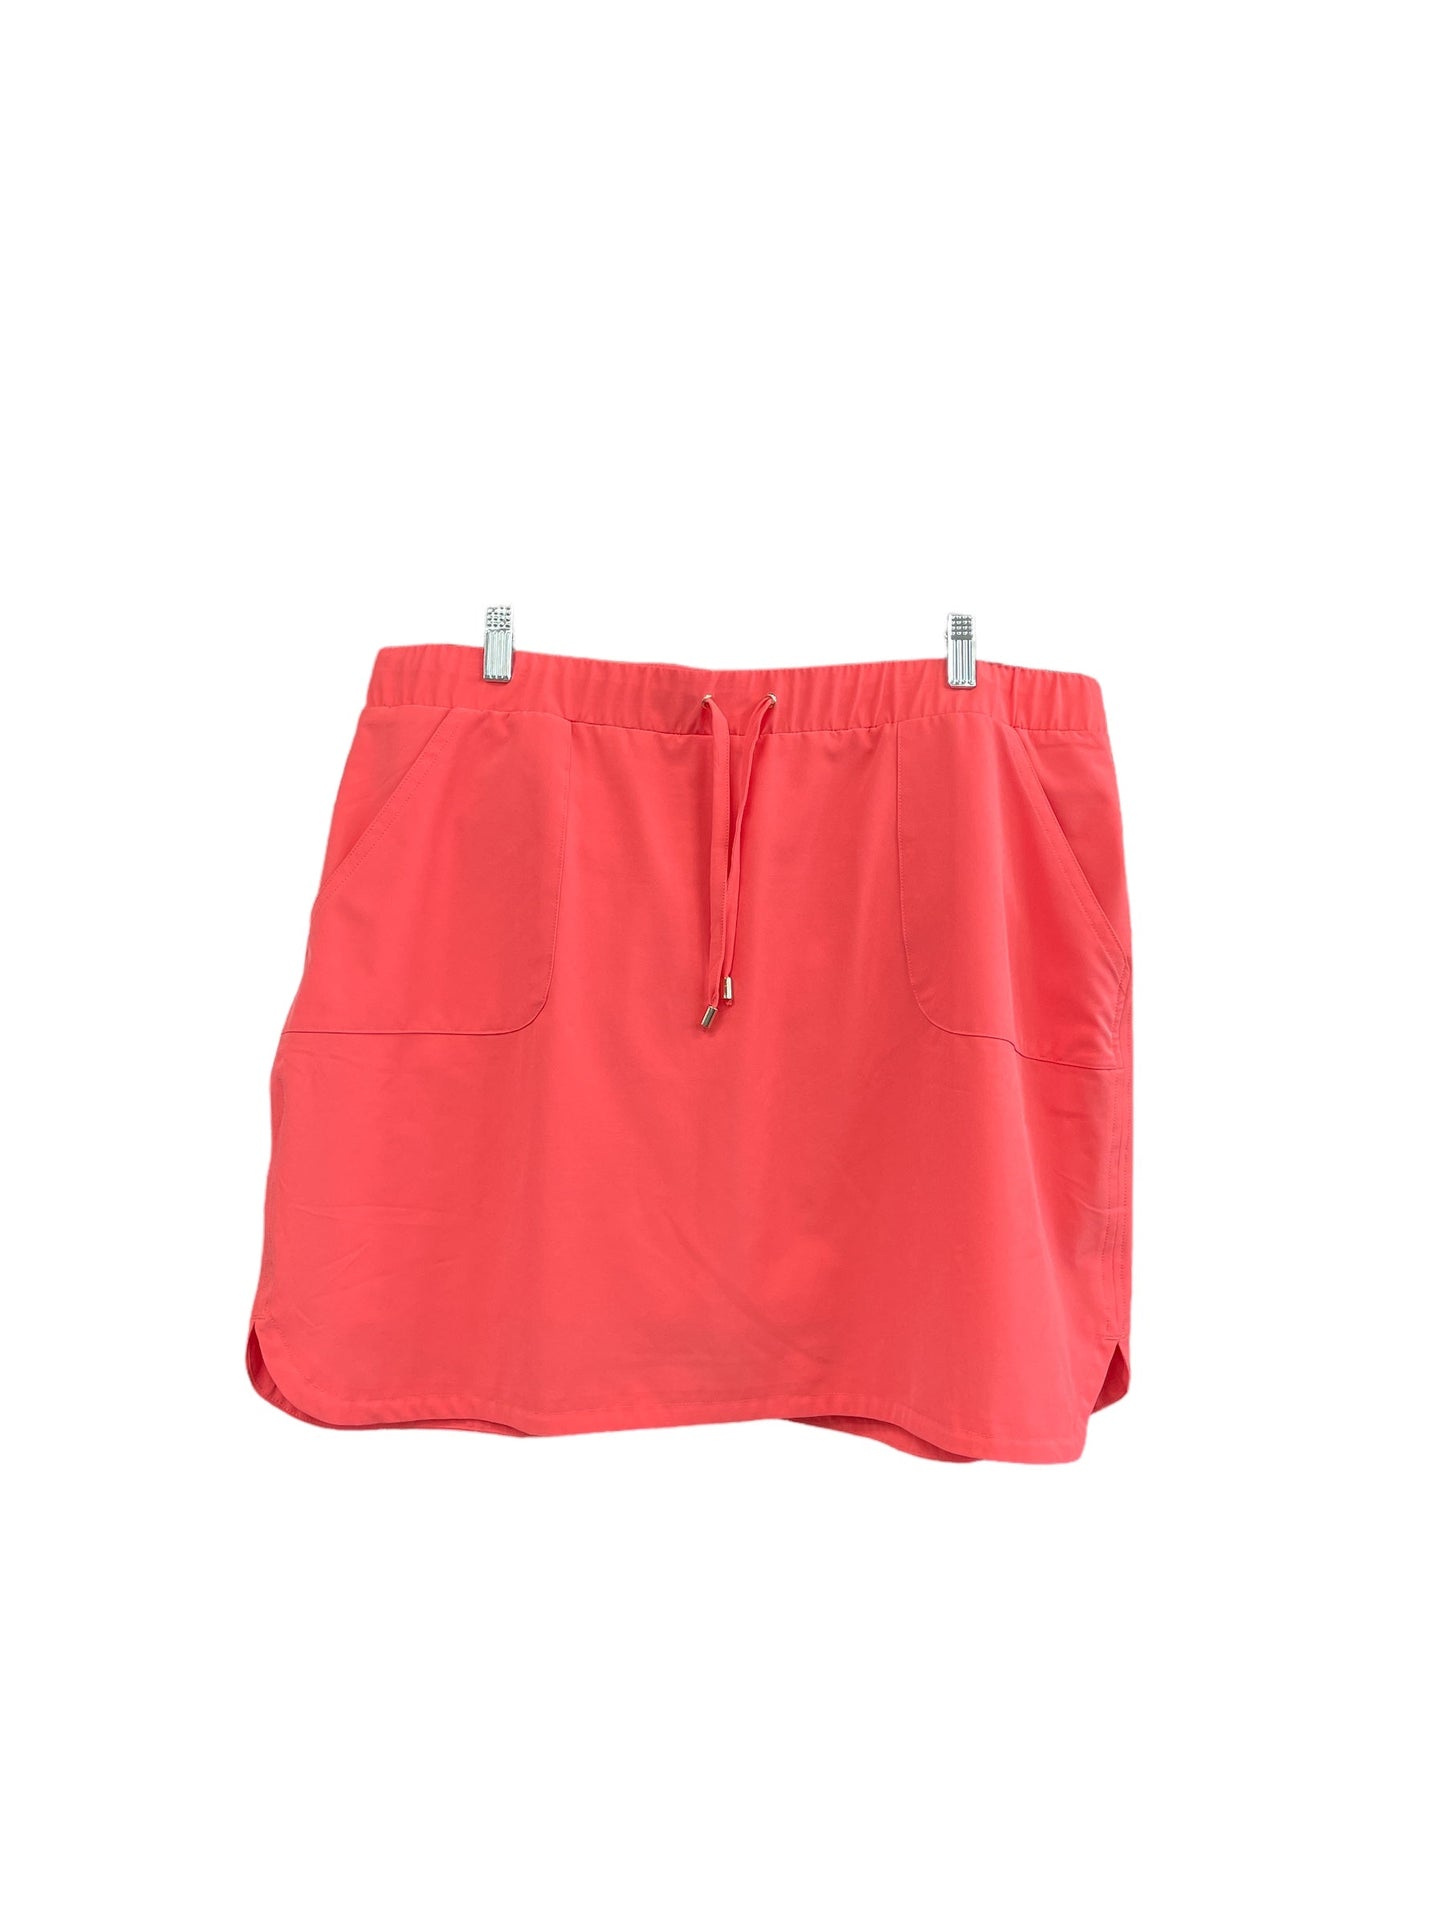 Skirt Mini & Short By Zenergy By Chicos  Size: L